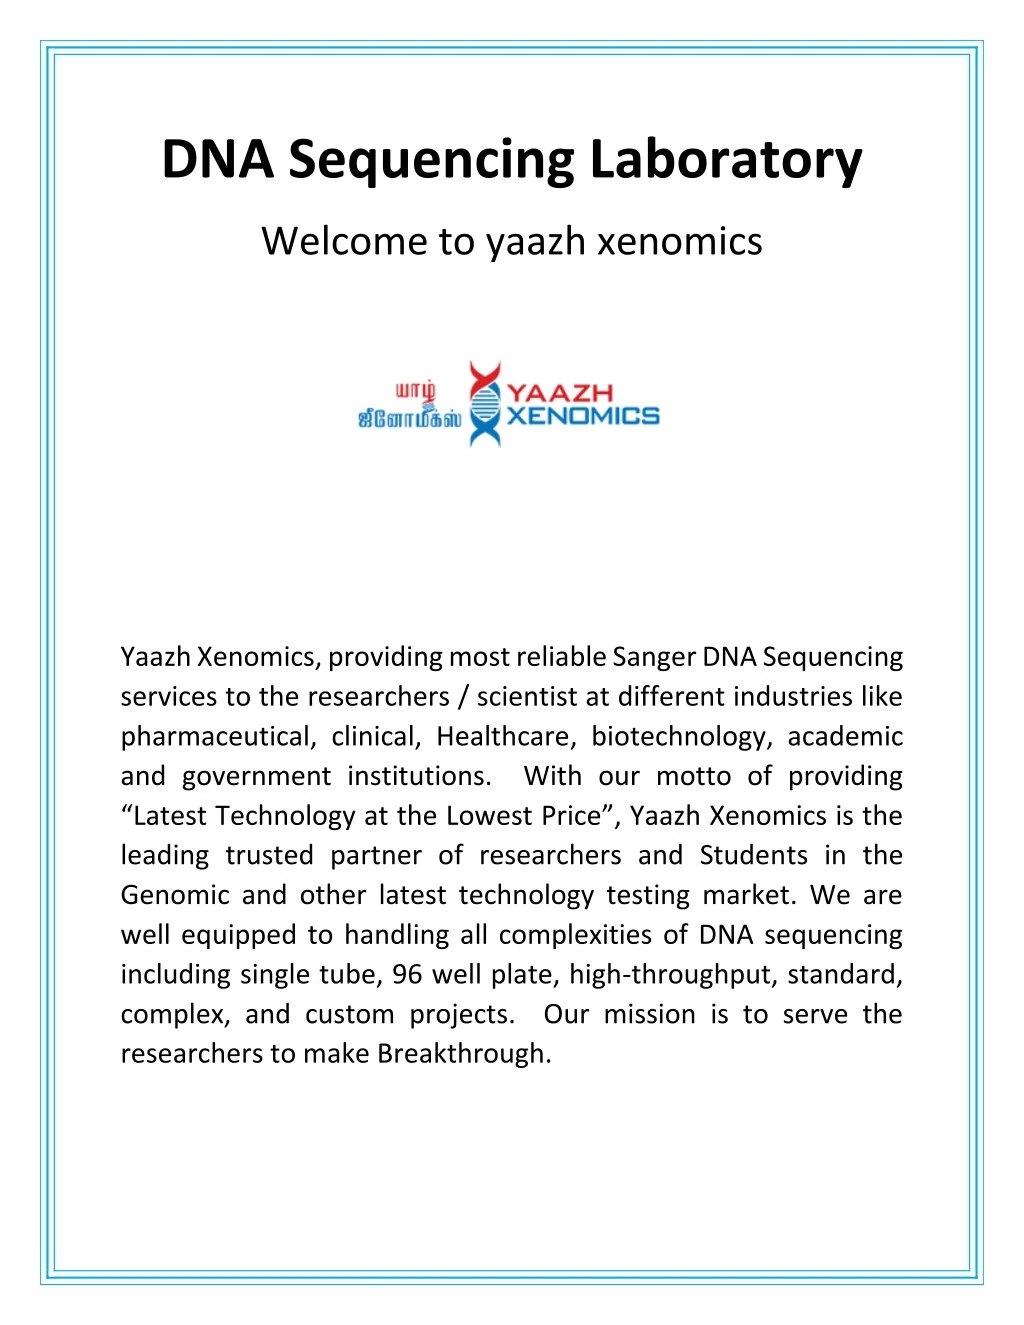 dna sequencing laboratory